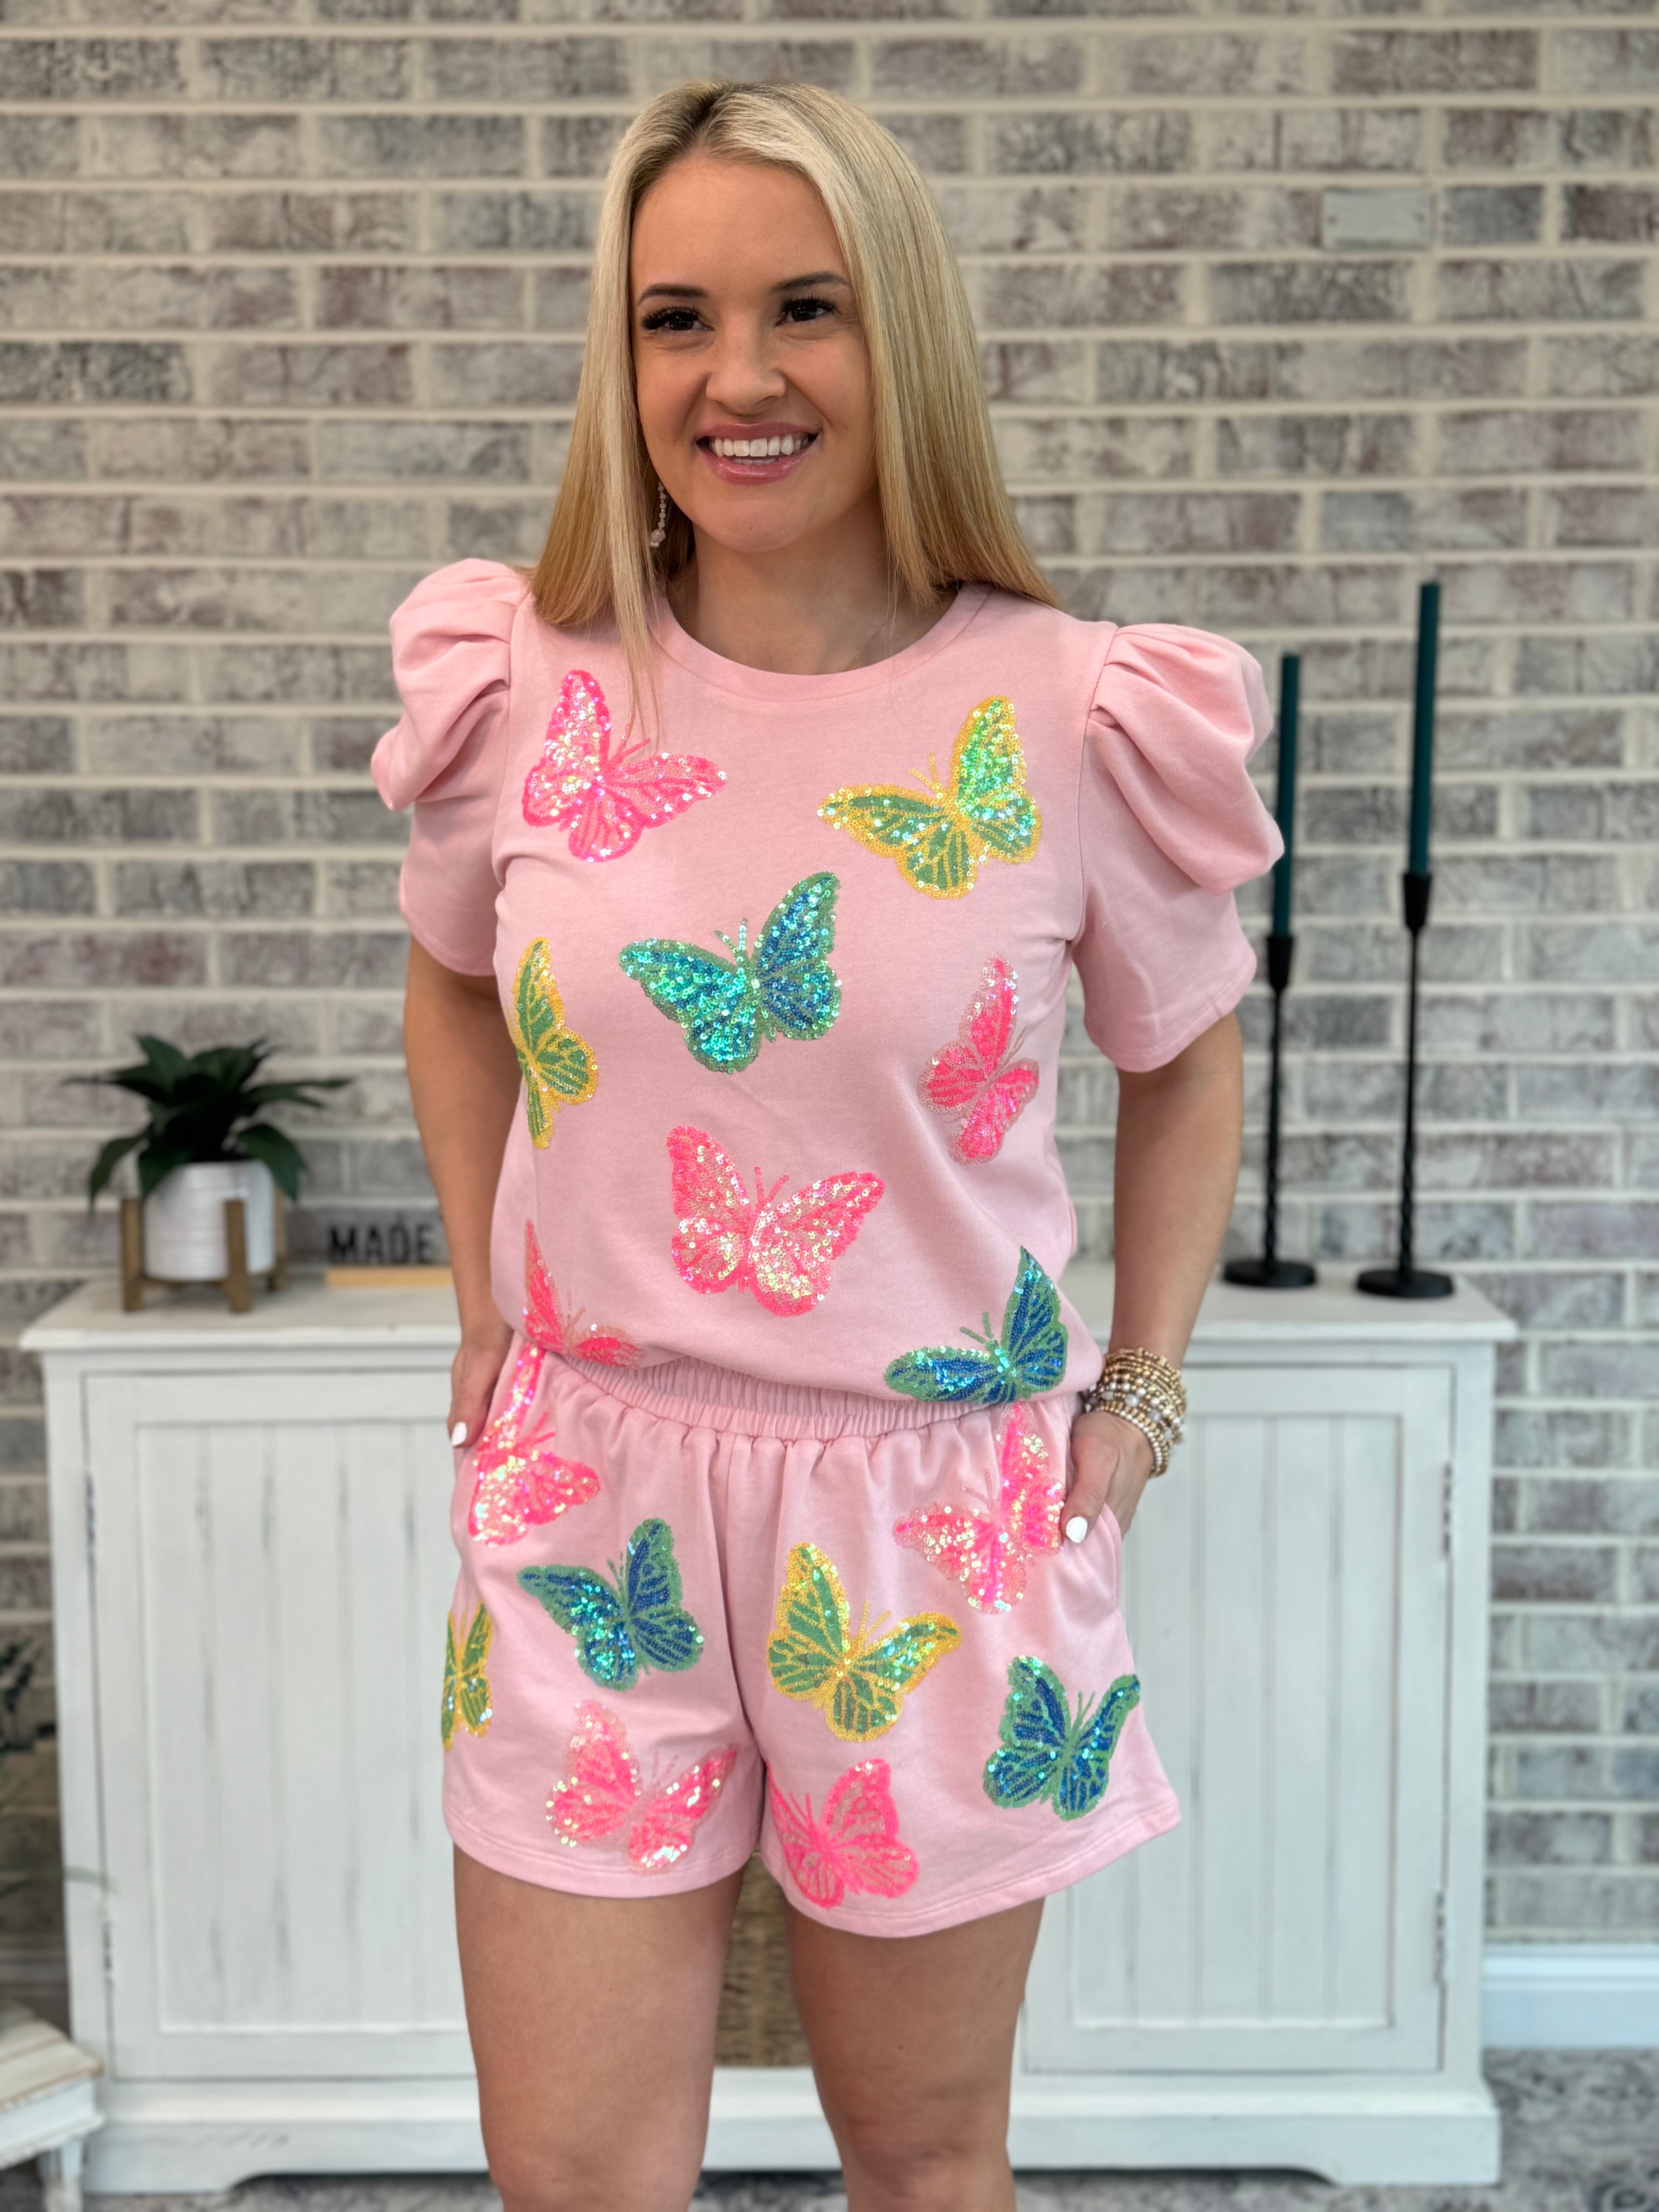 Butterfly Confetti Sequin Short Sleeve Top-The Lovely Closet-The Lovely Closet, Women's Fashion Boutique in Alexandria, KY